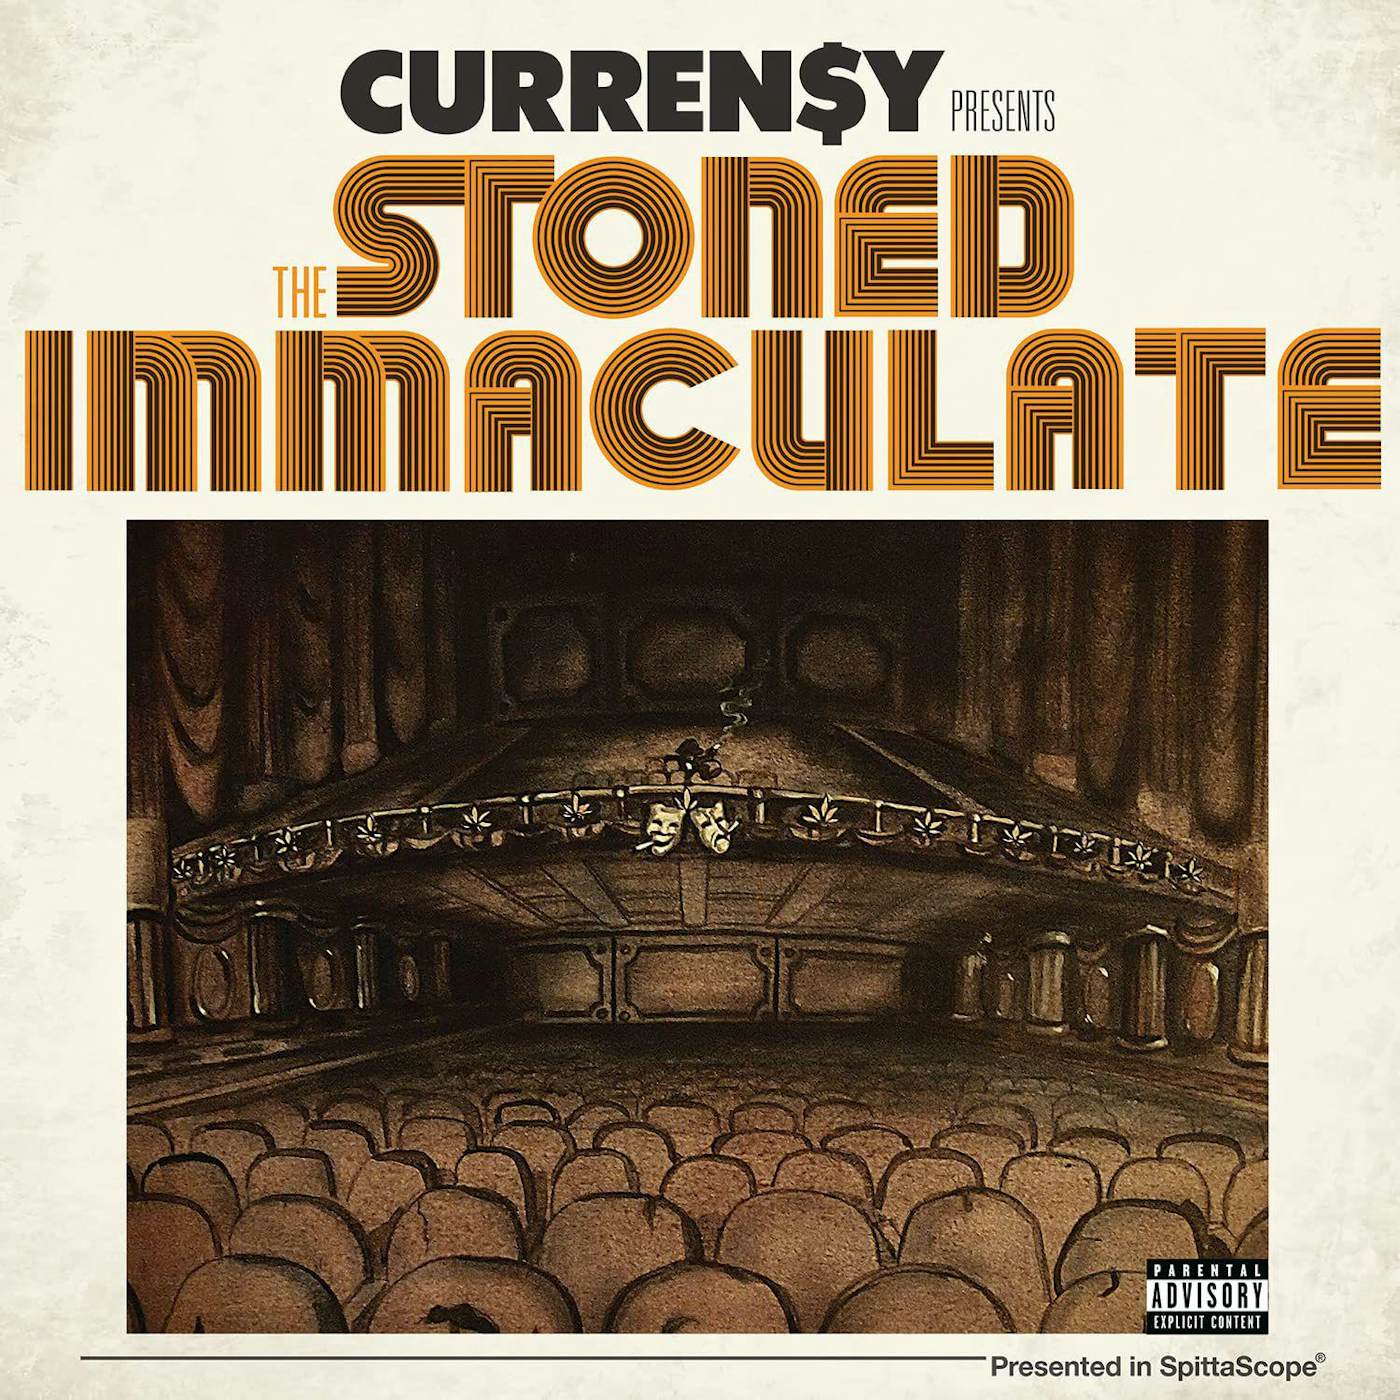 Curren$y Stoned Immaculate Vinyl Record